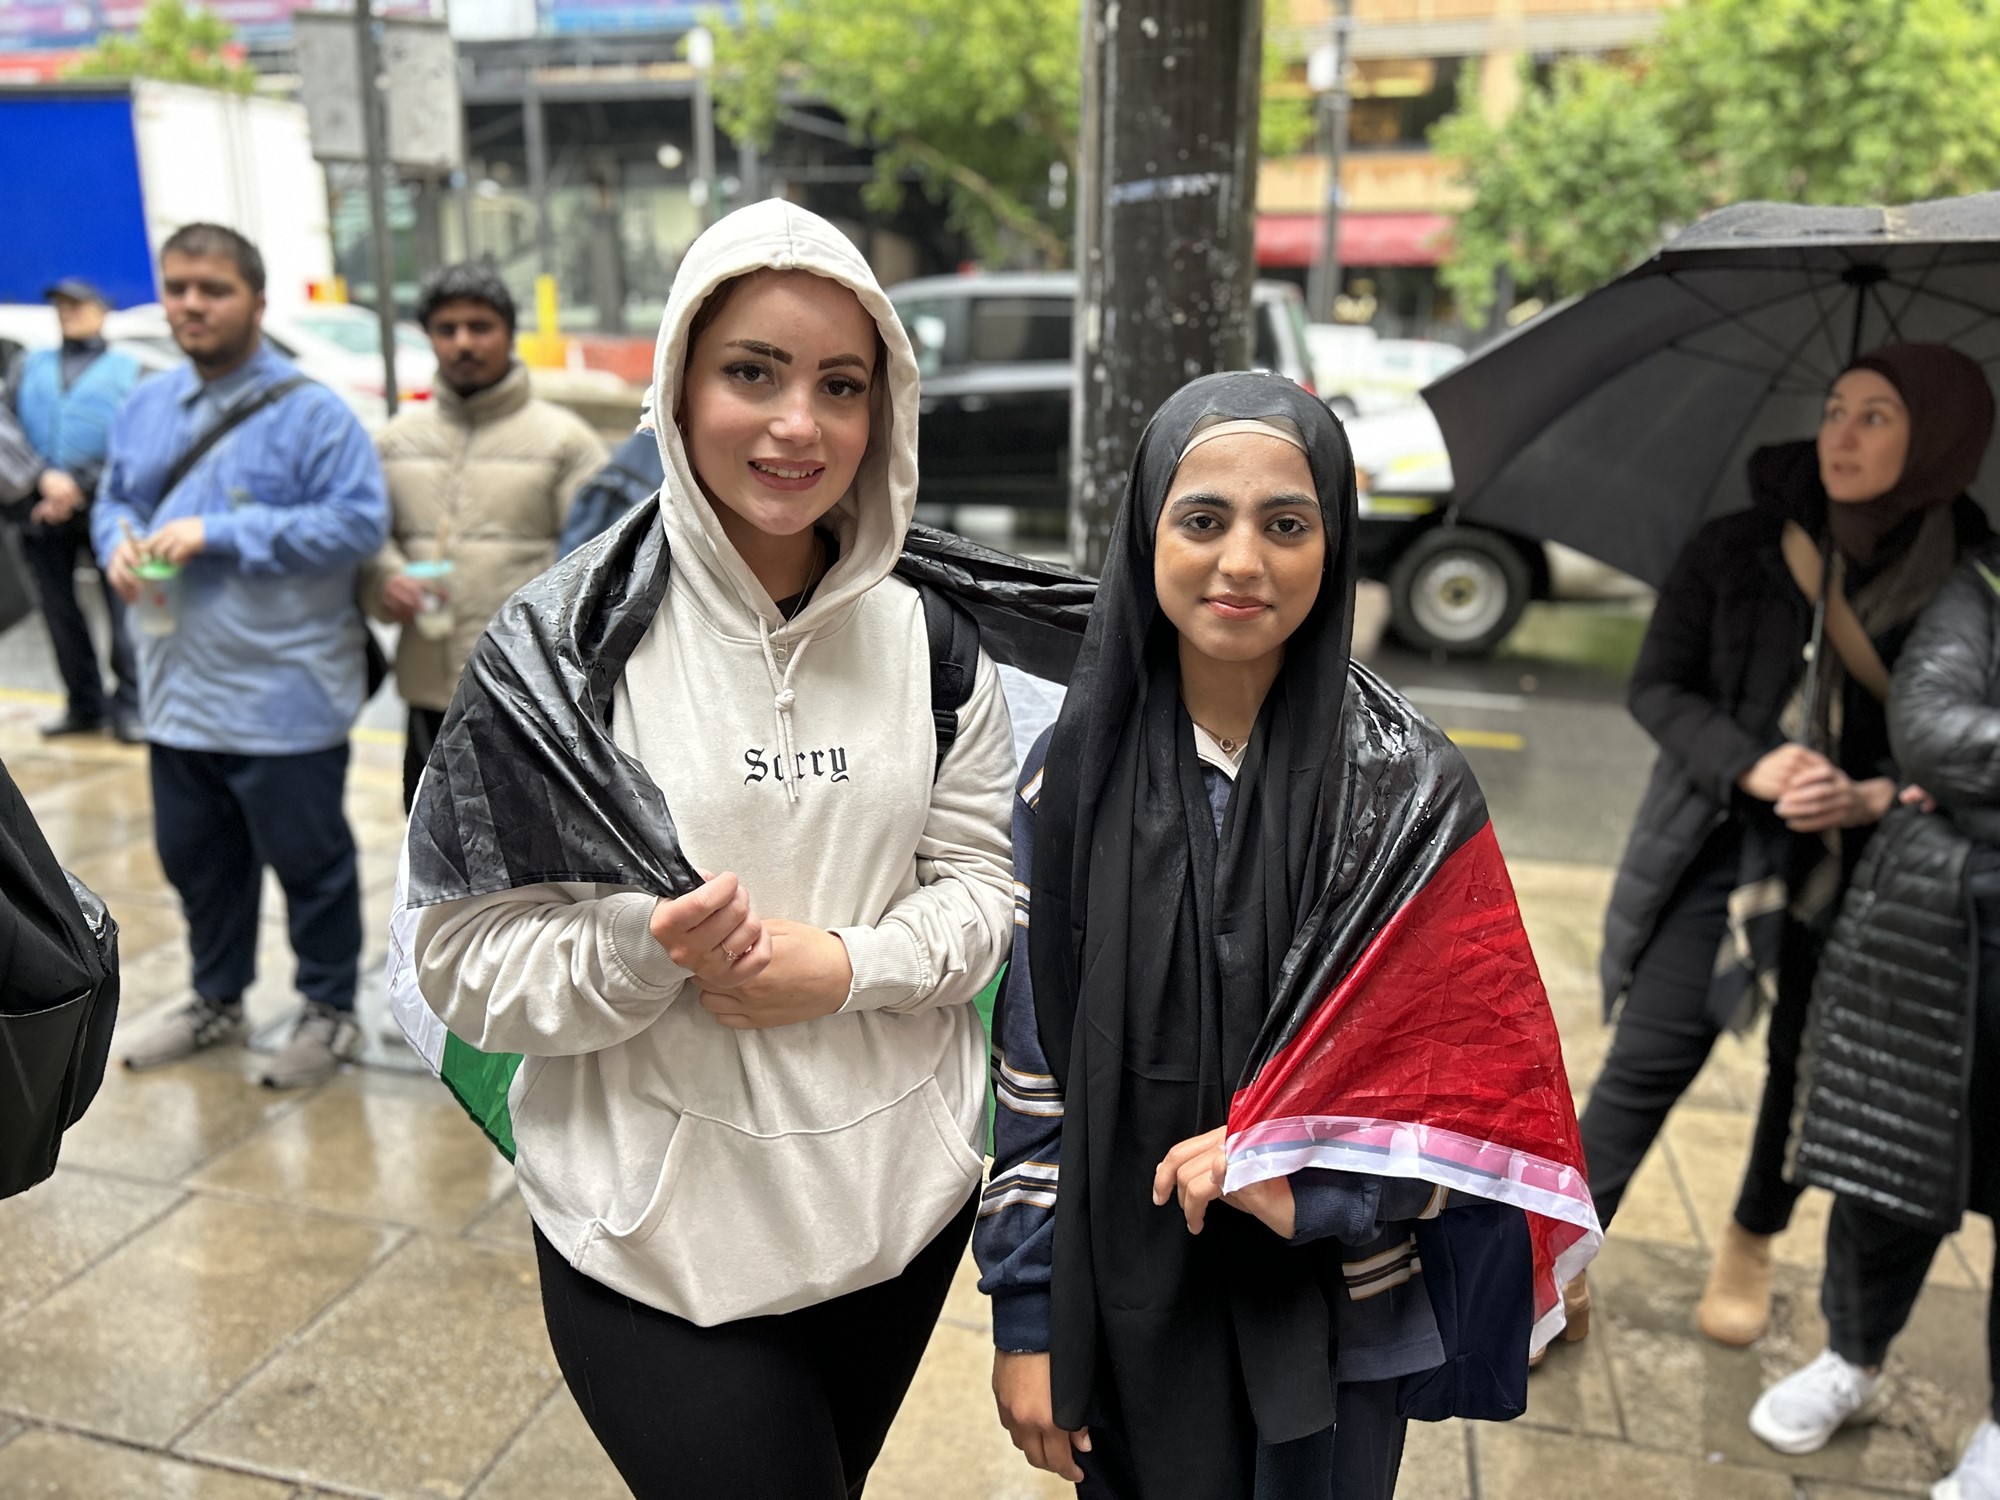 Two girls are pictured, they look rained on and are wearing a Palestinian flag over their shoulders.